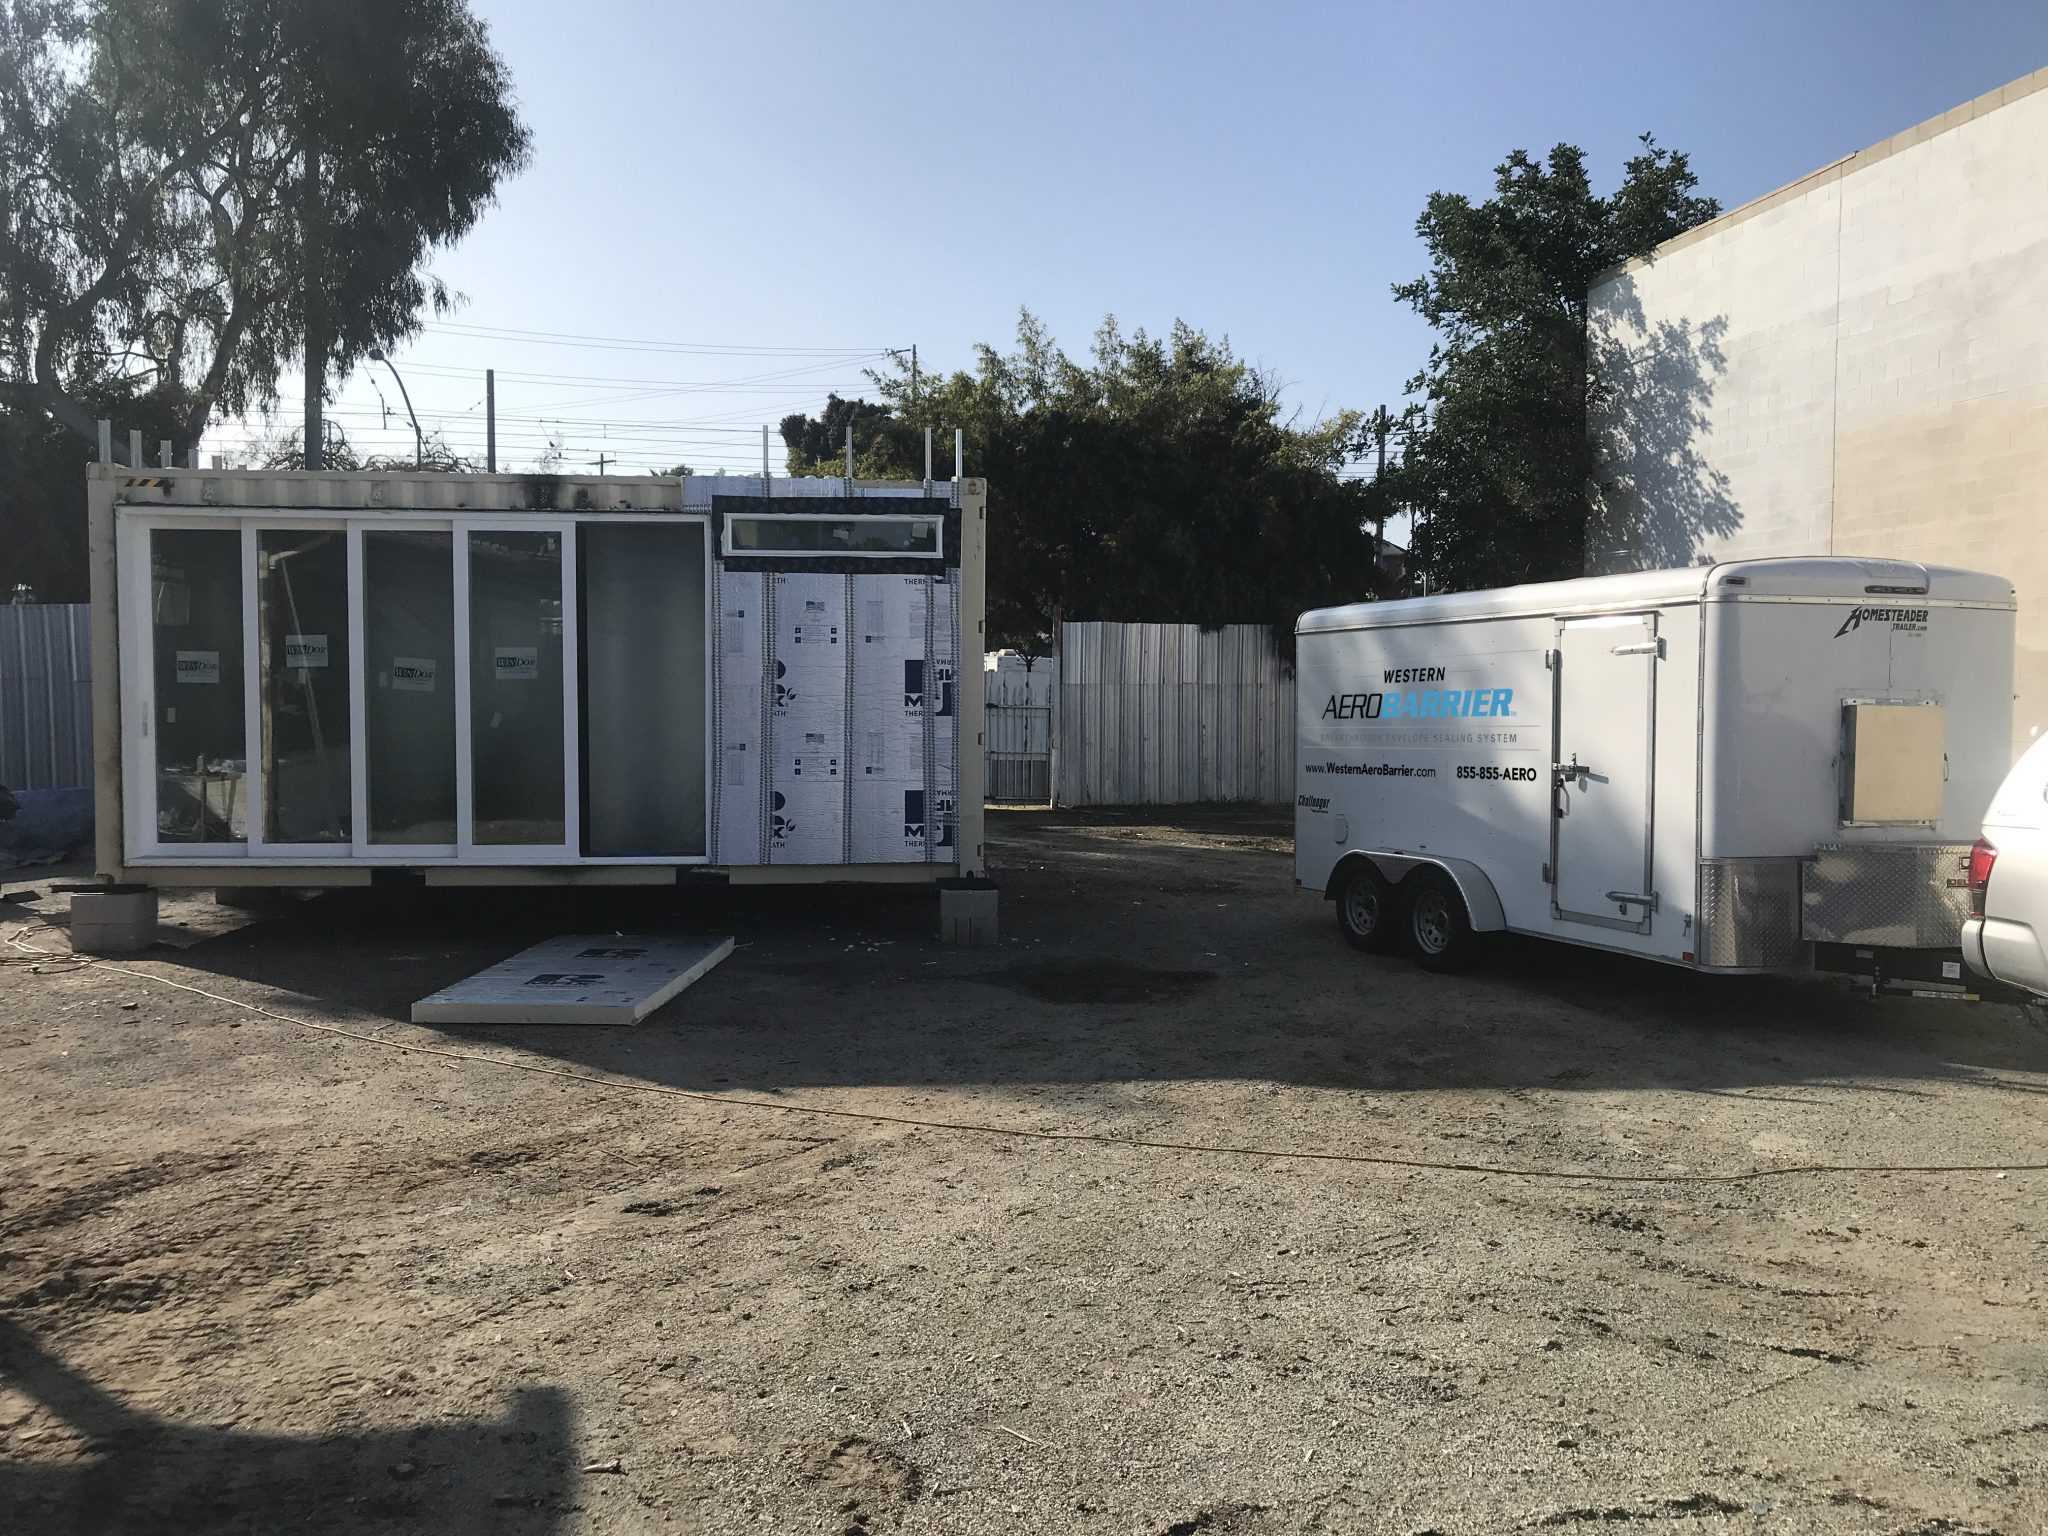 Single Family: Shipping Container ADU [San Diego, CA]